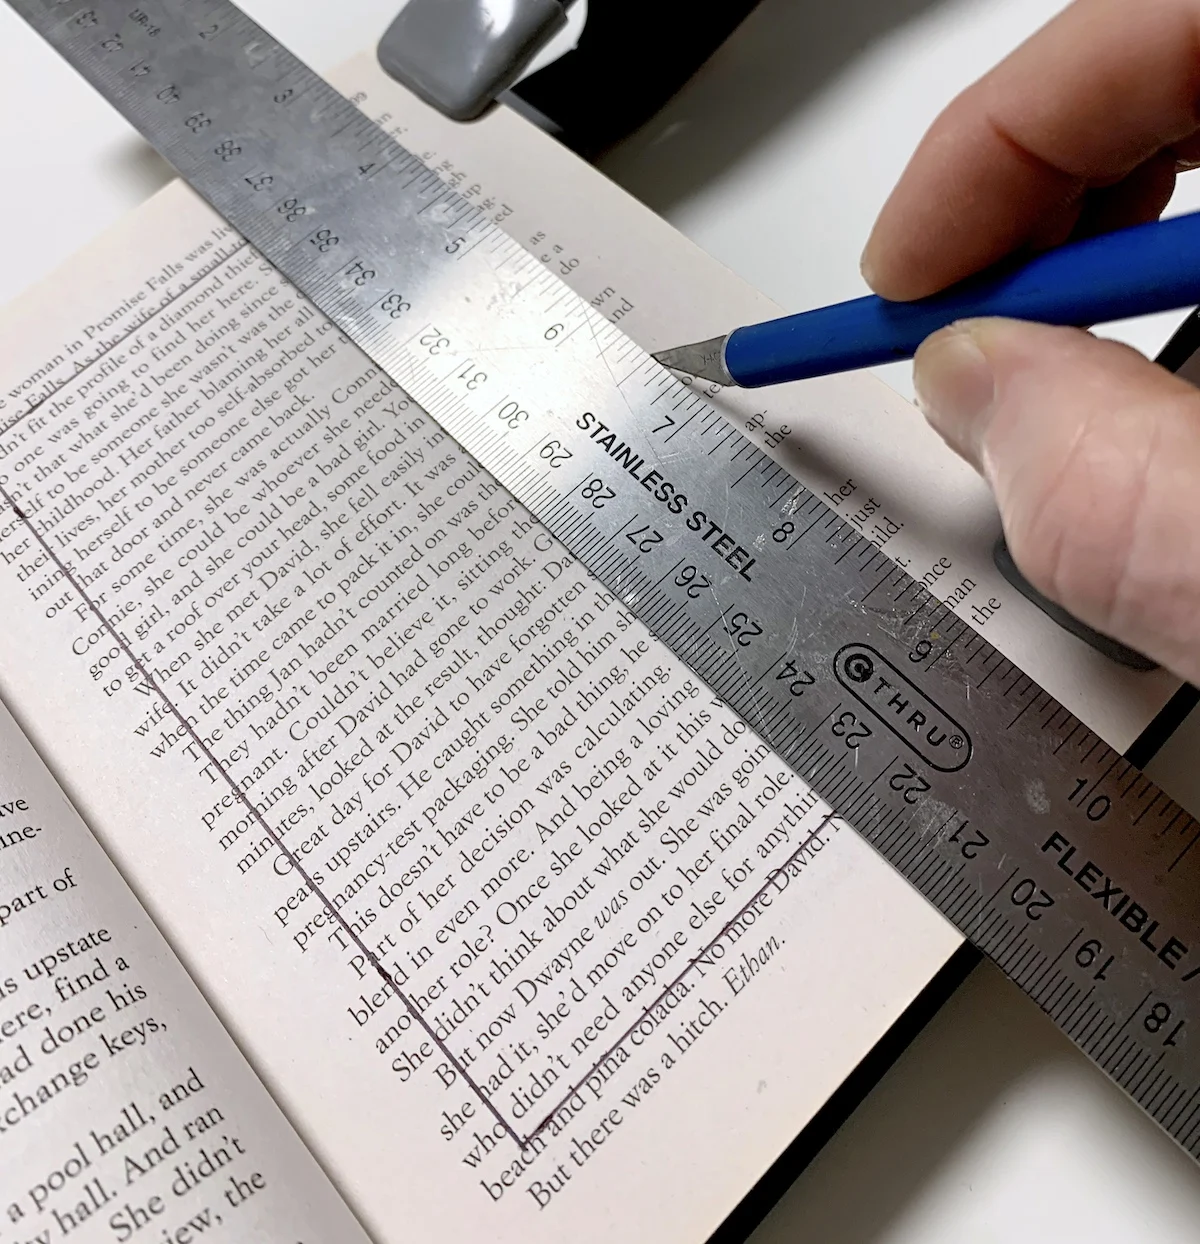 Using a craft knife to cut into the book pages